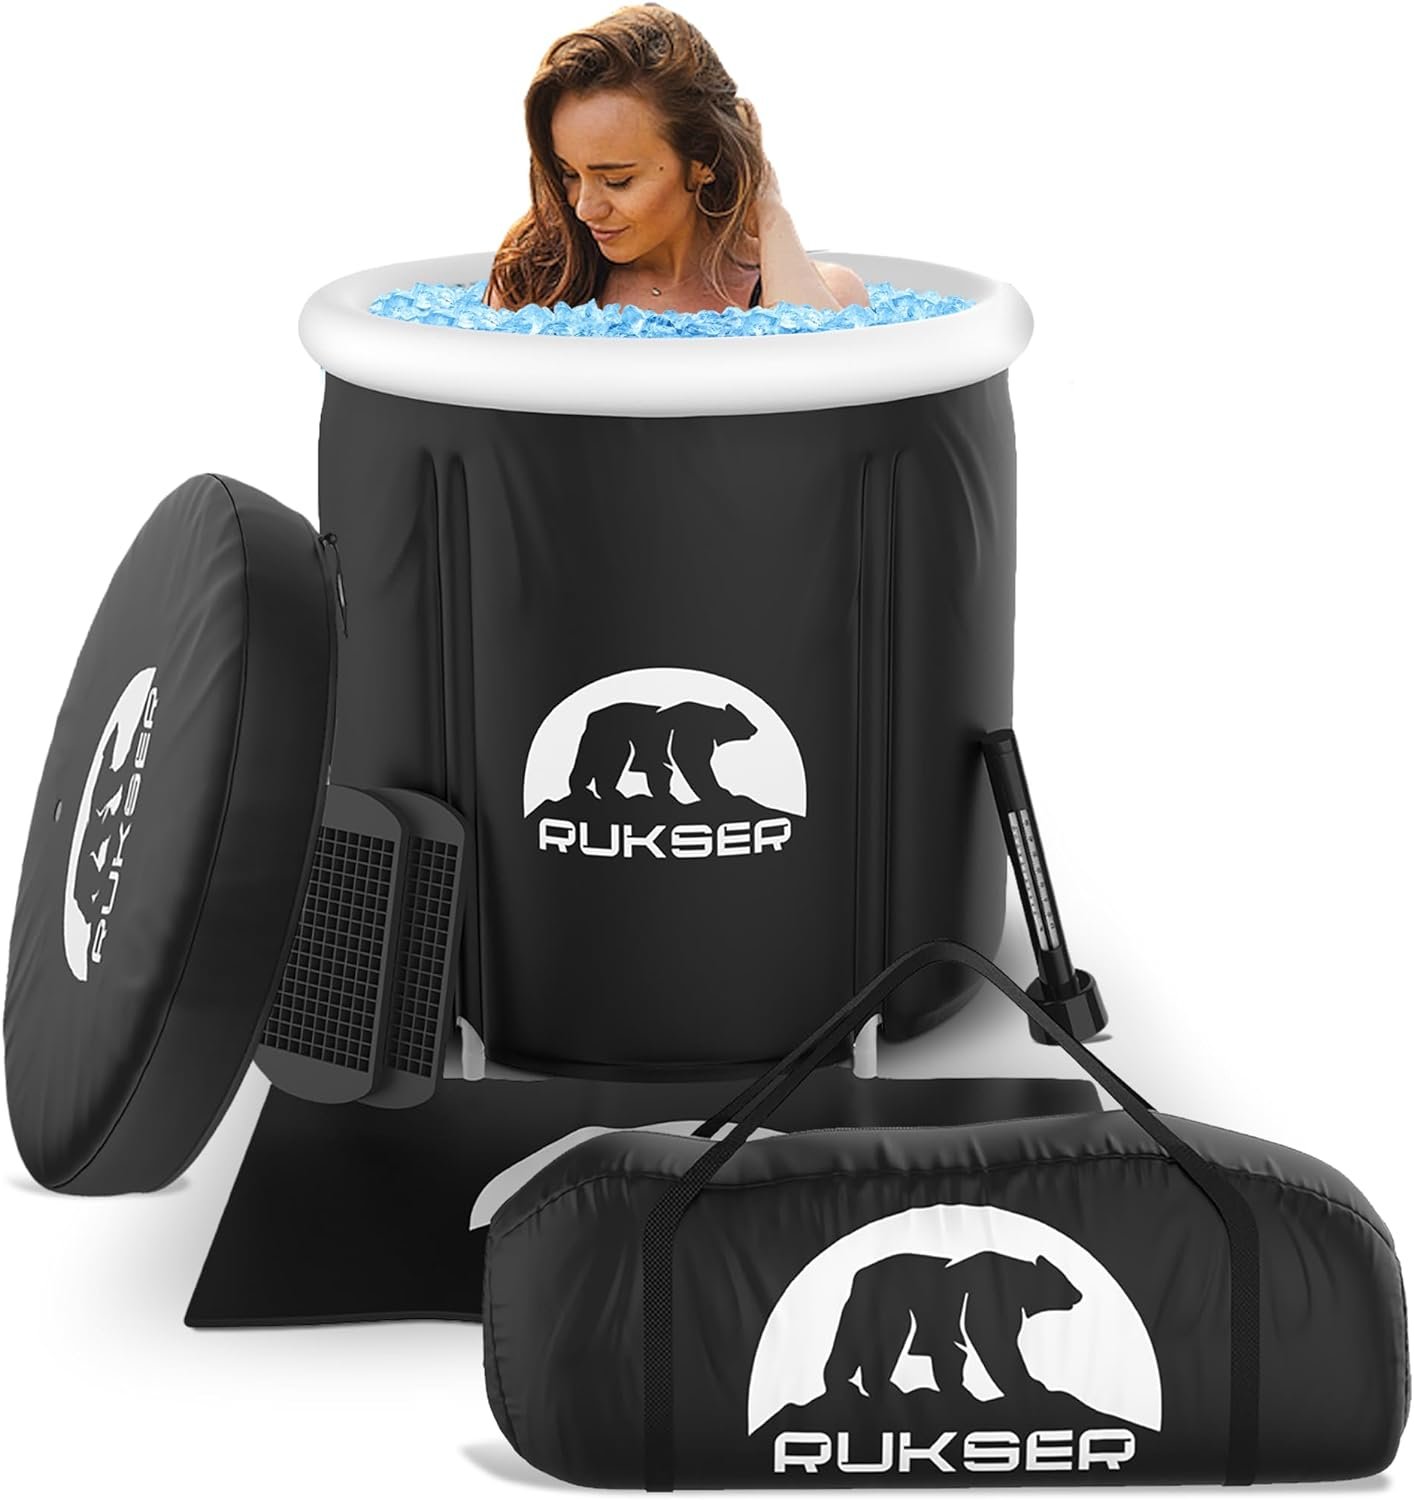 Portable ice Bath Tub for Athletes XL review